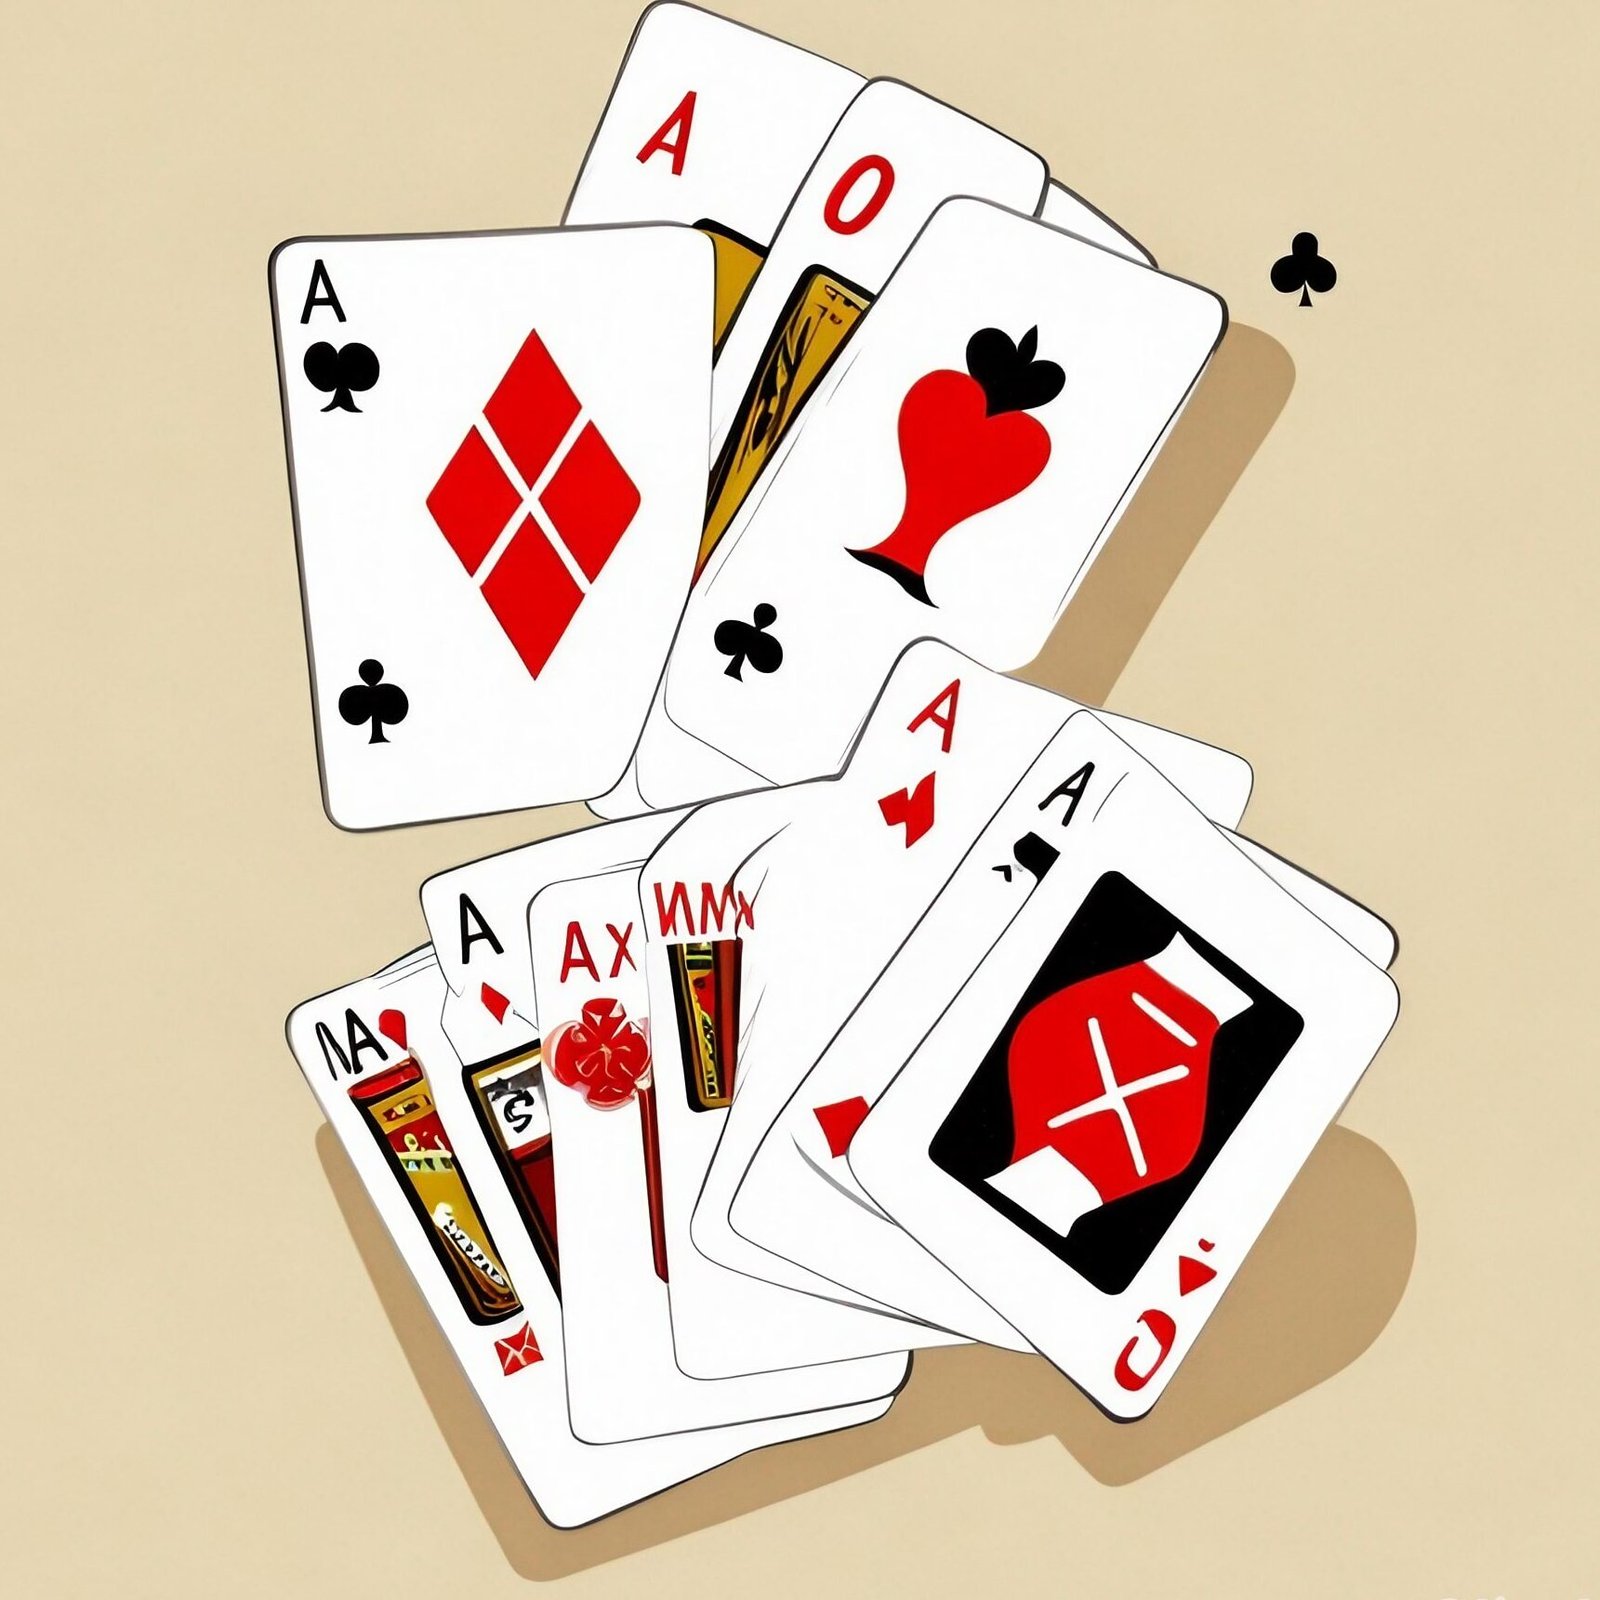 Yandex Games Unblocked to Play Now.
"Yandex Solitaire" offers a relaxing escape into the world of card games